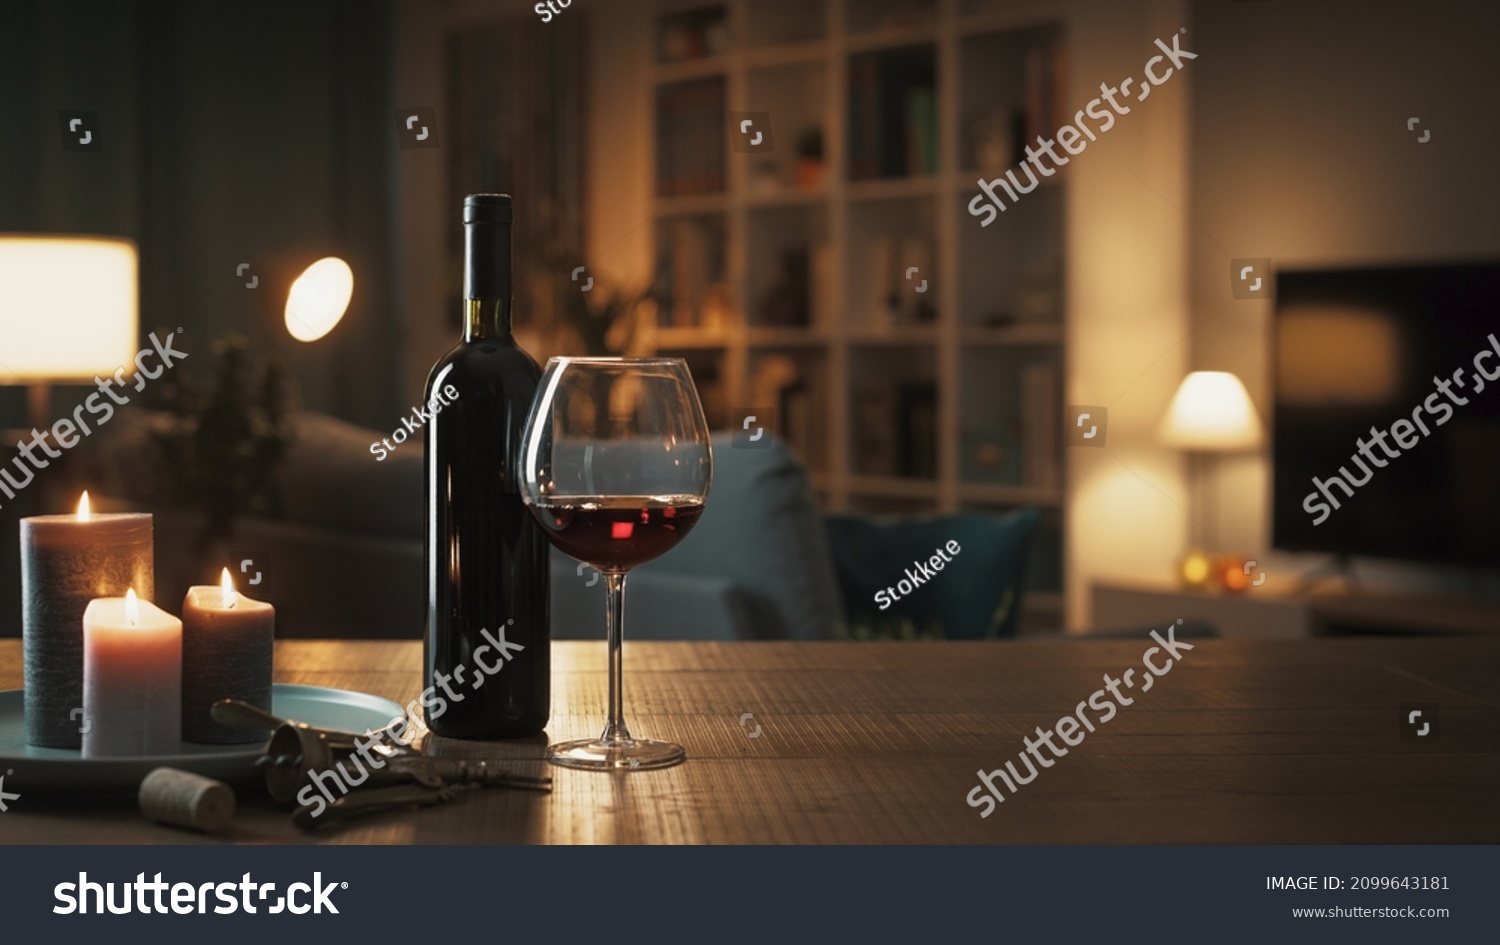 Red wine tasting at home: wine bottle, wineglass, corkscrew and candles on a table in the living room at night #2099643181